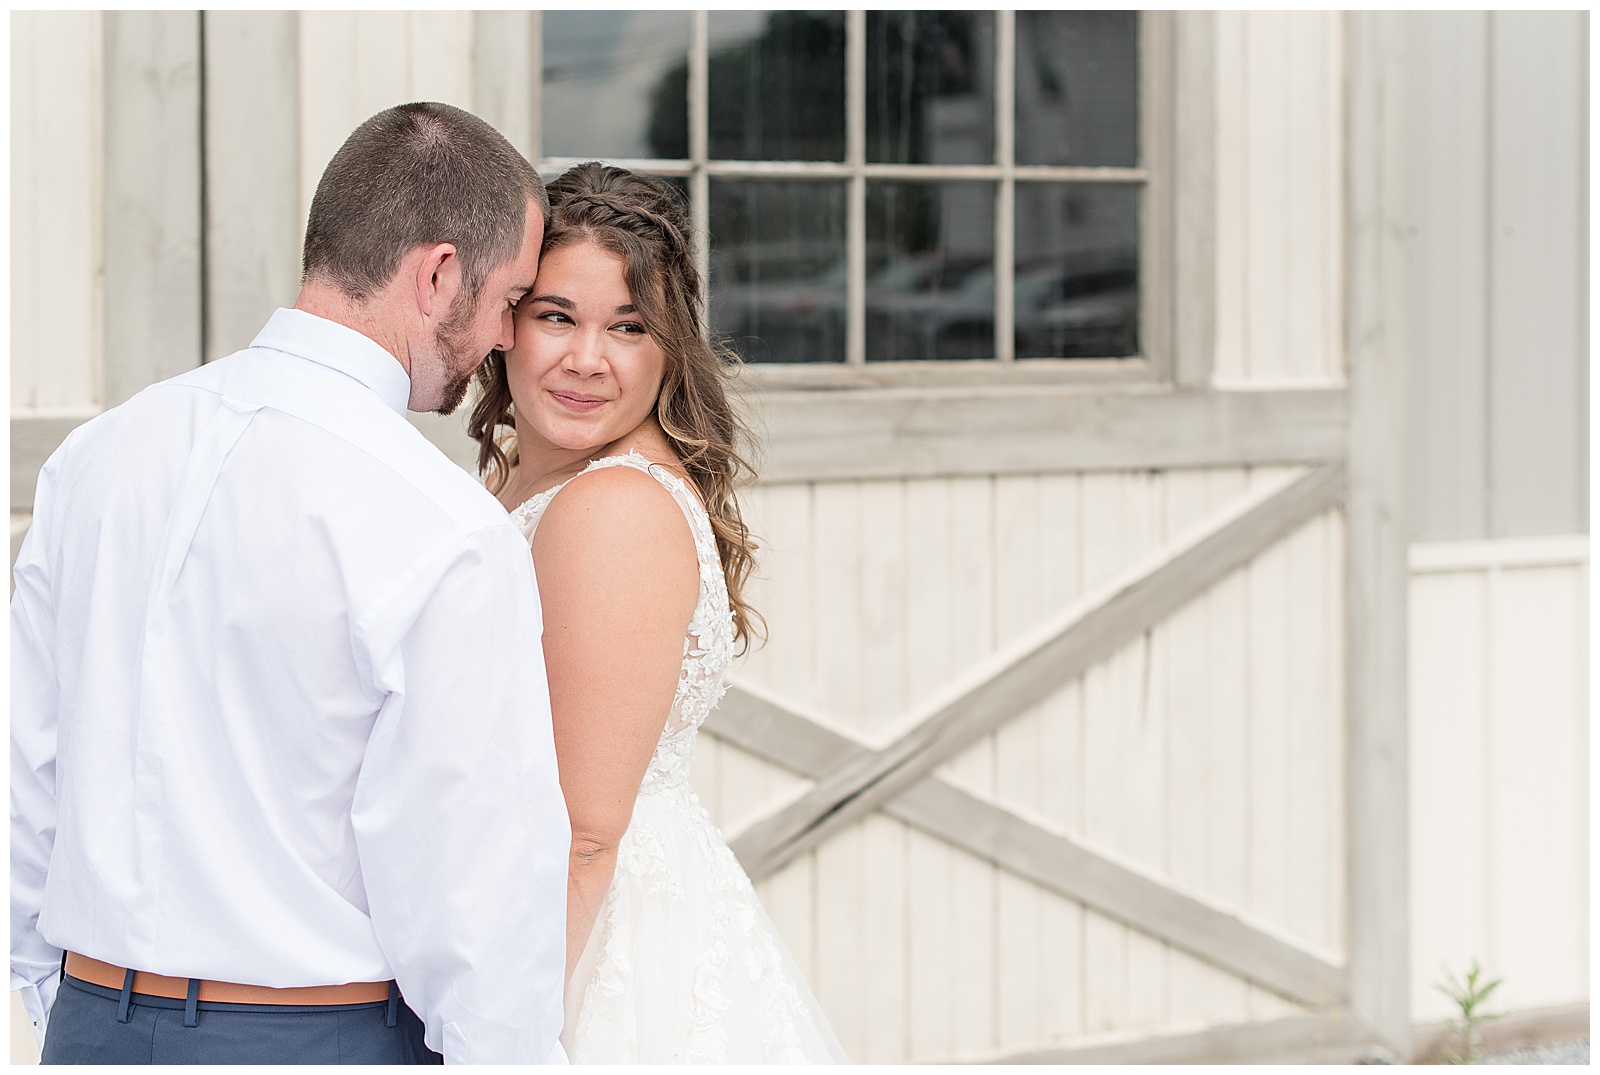 bride looking off camera as groom rests head on her temple in front of white barn doors